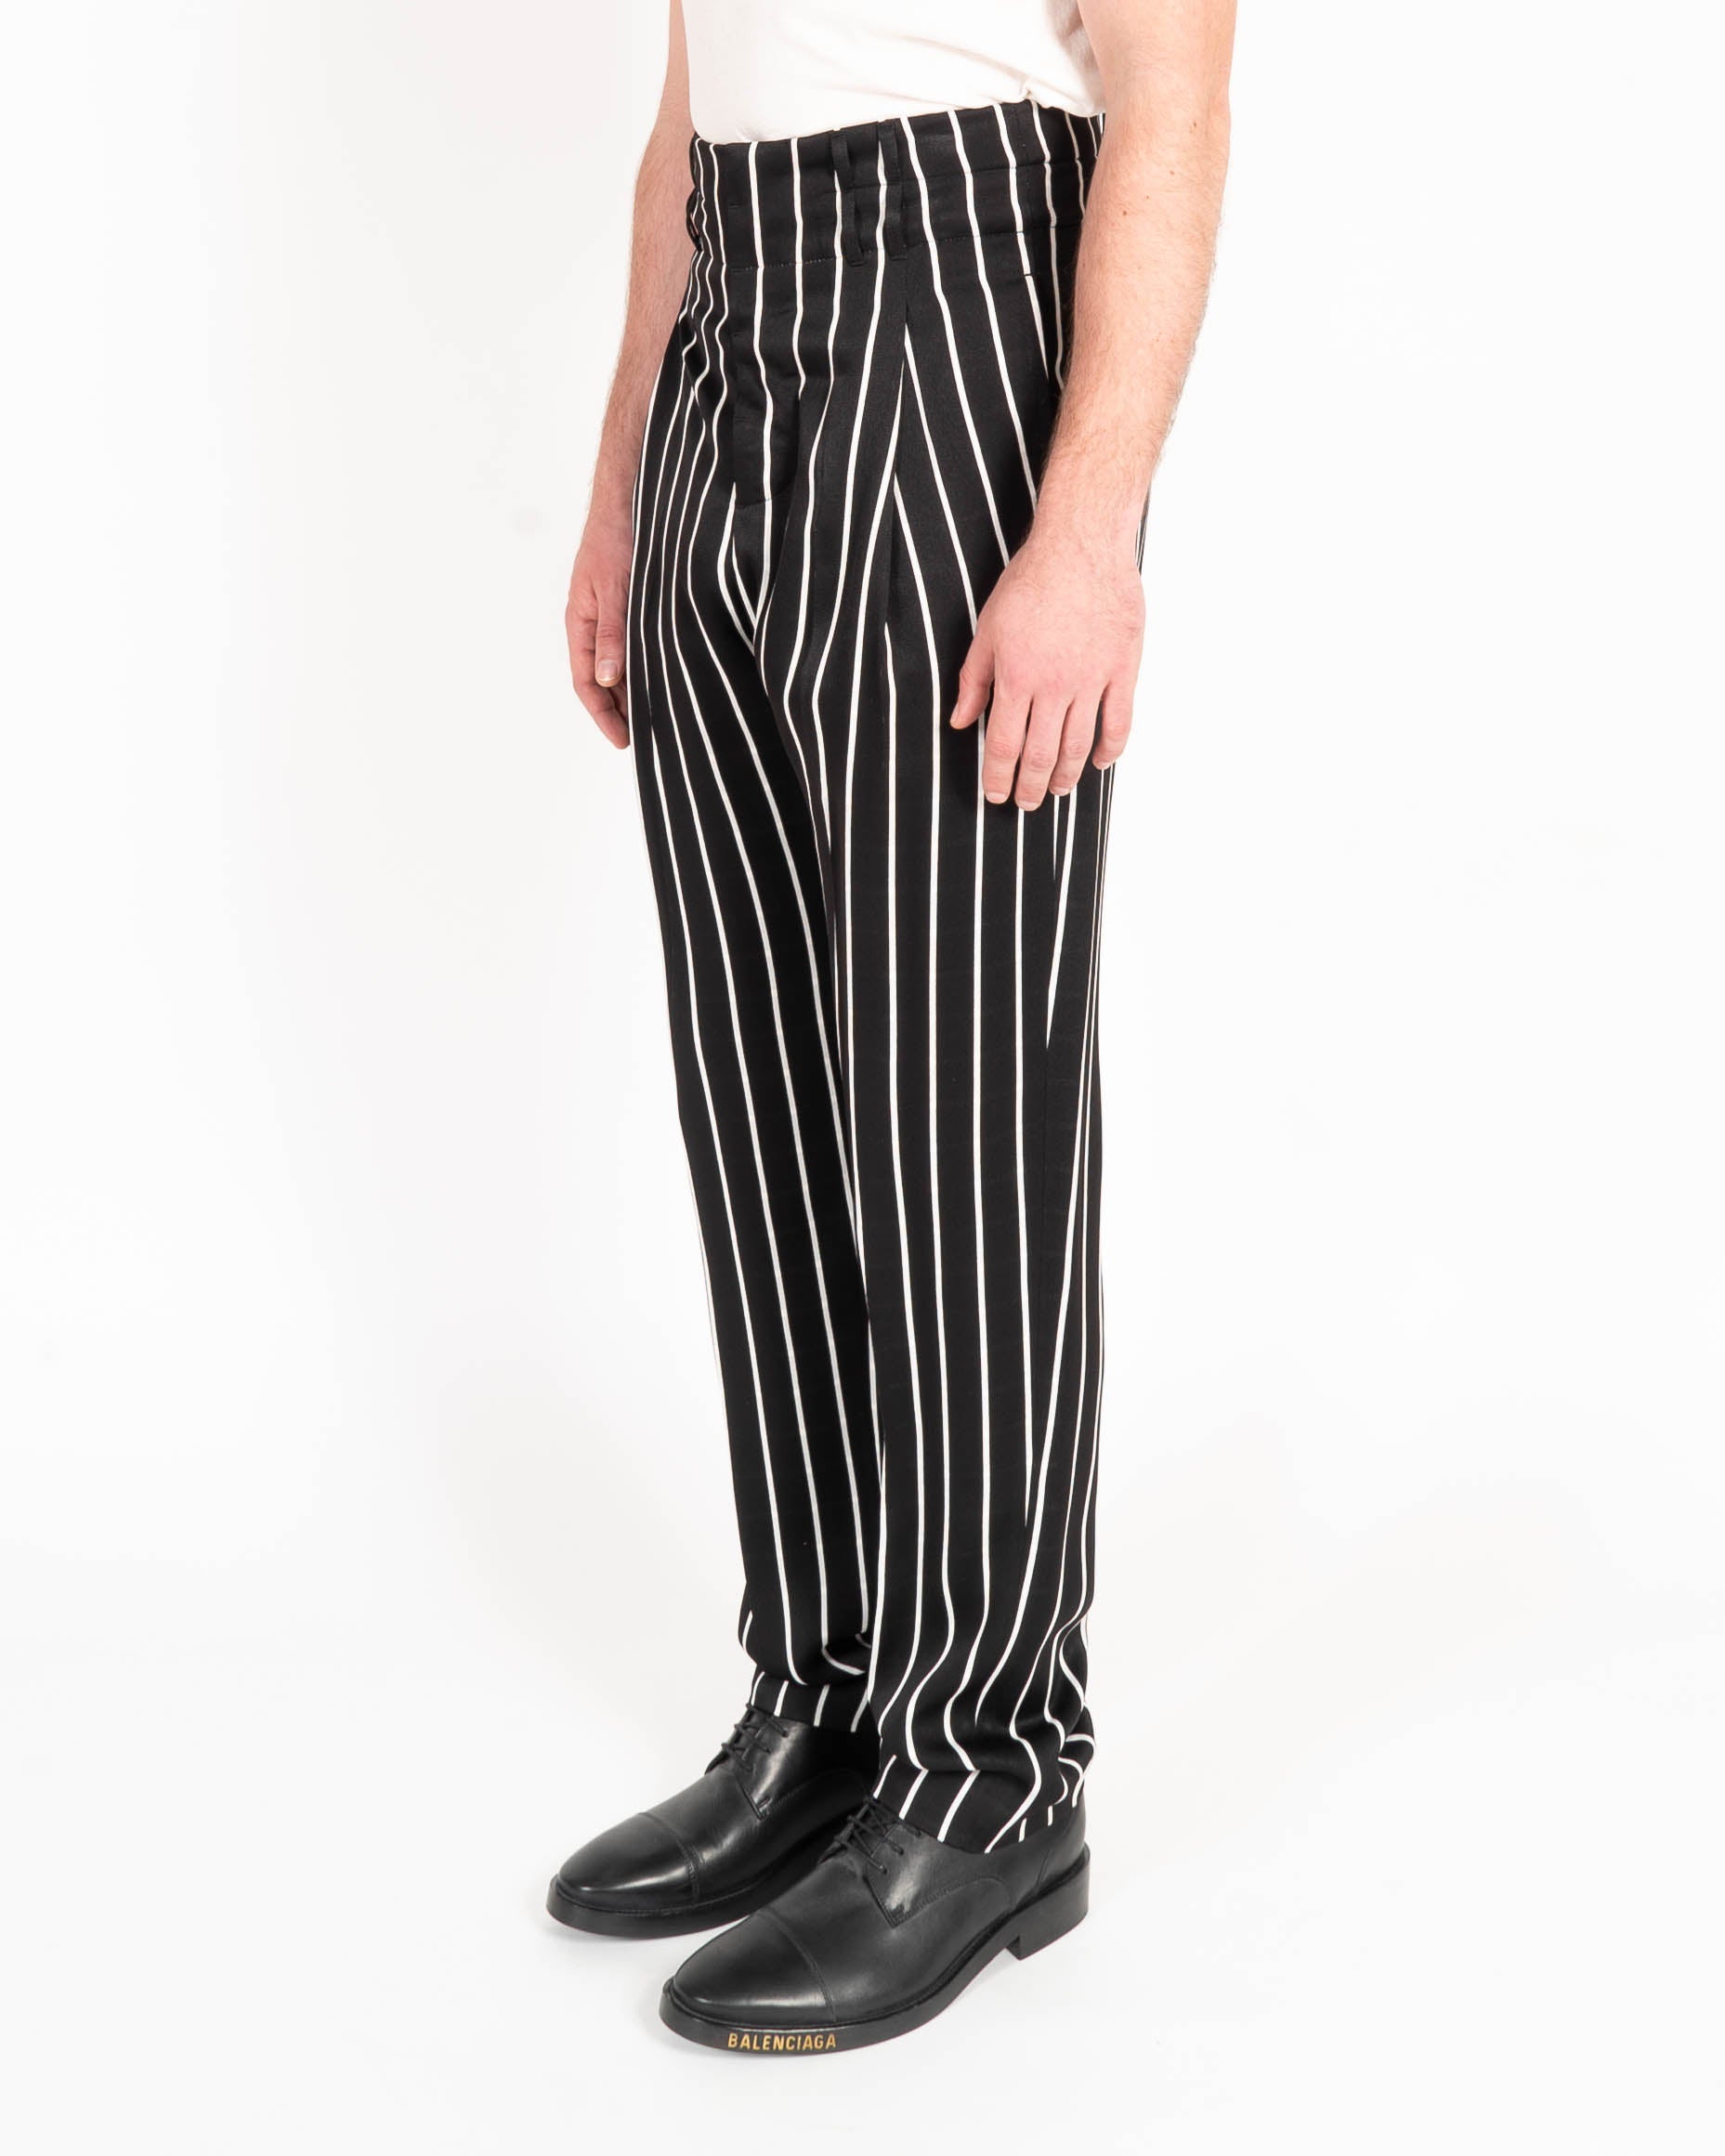 SS18 High-Waisted Striped Trousers in Black & White Viscose